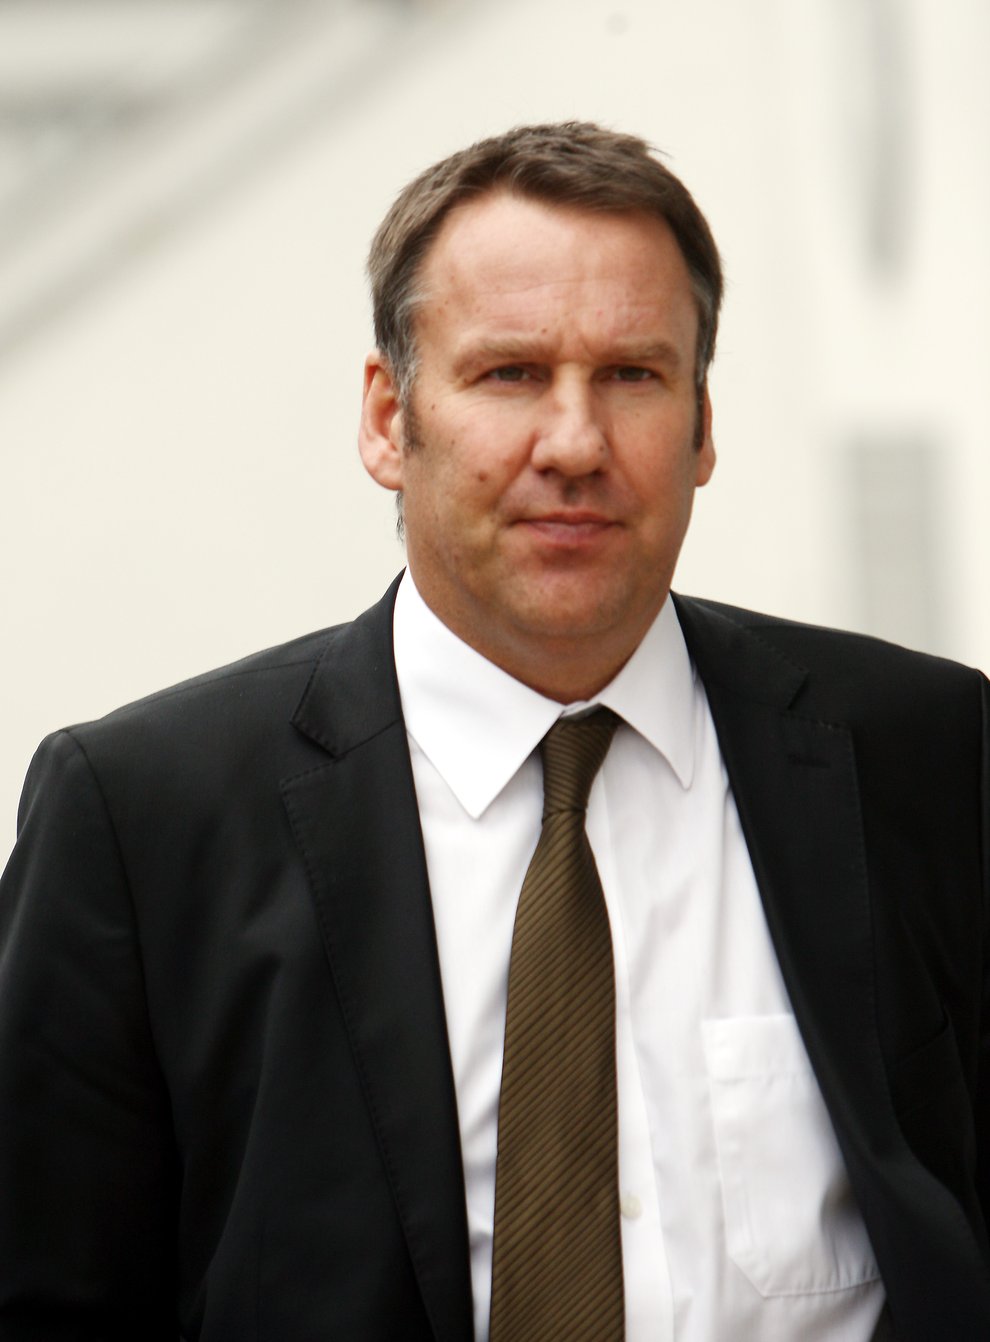 Former Arsenal star Paul Merson has been open and honest about his addictions. (David Jones/PA)